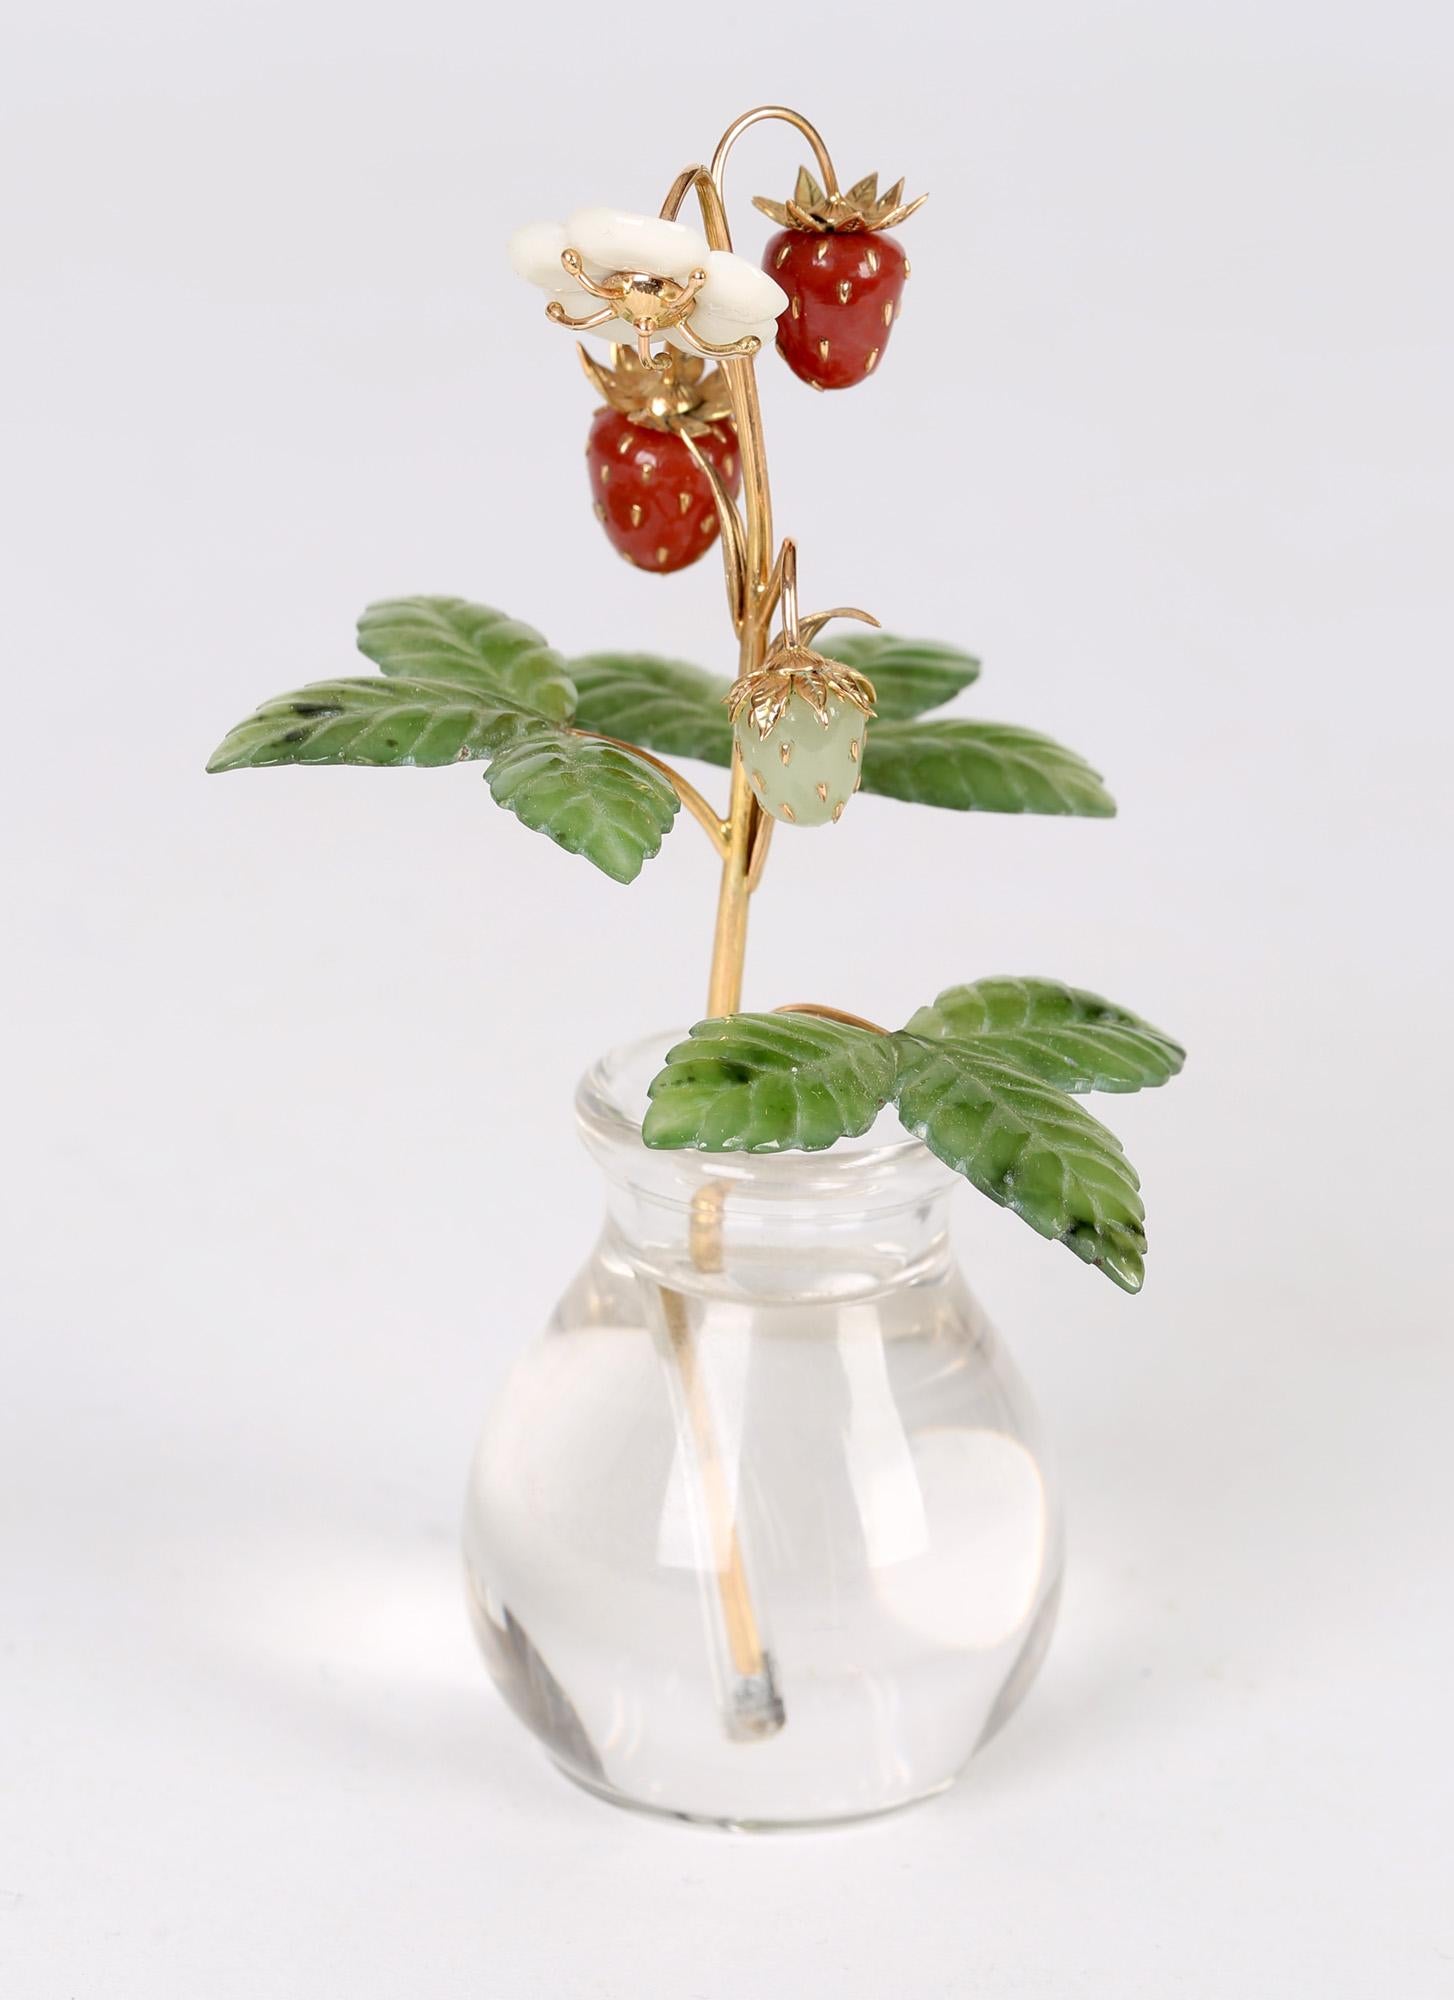 Fabergé Style Exquisite Wild Strawberry Stem with Crystal Vase 4